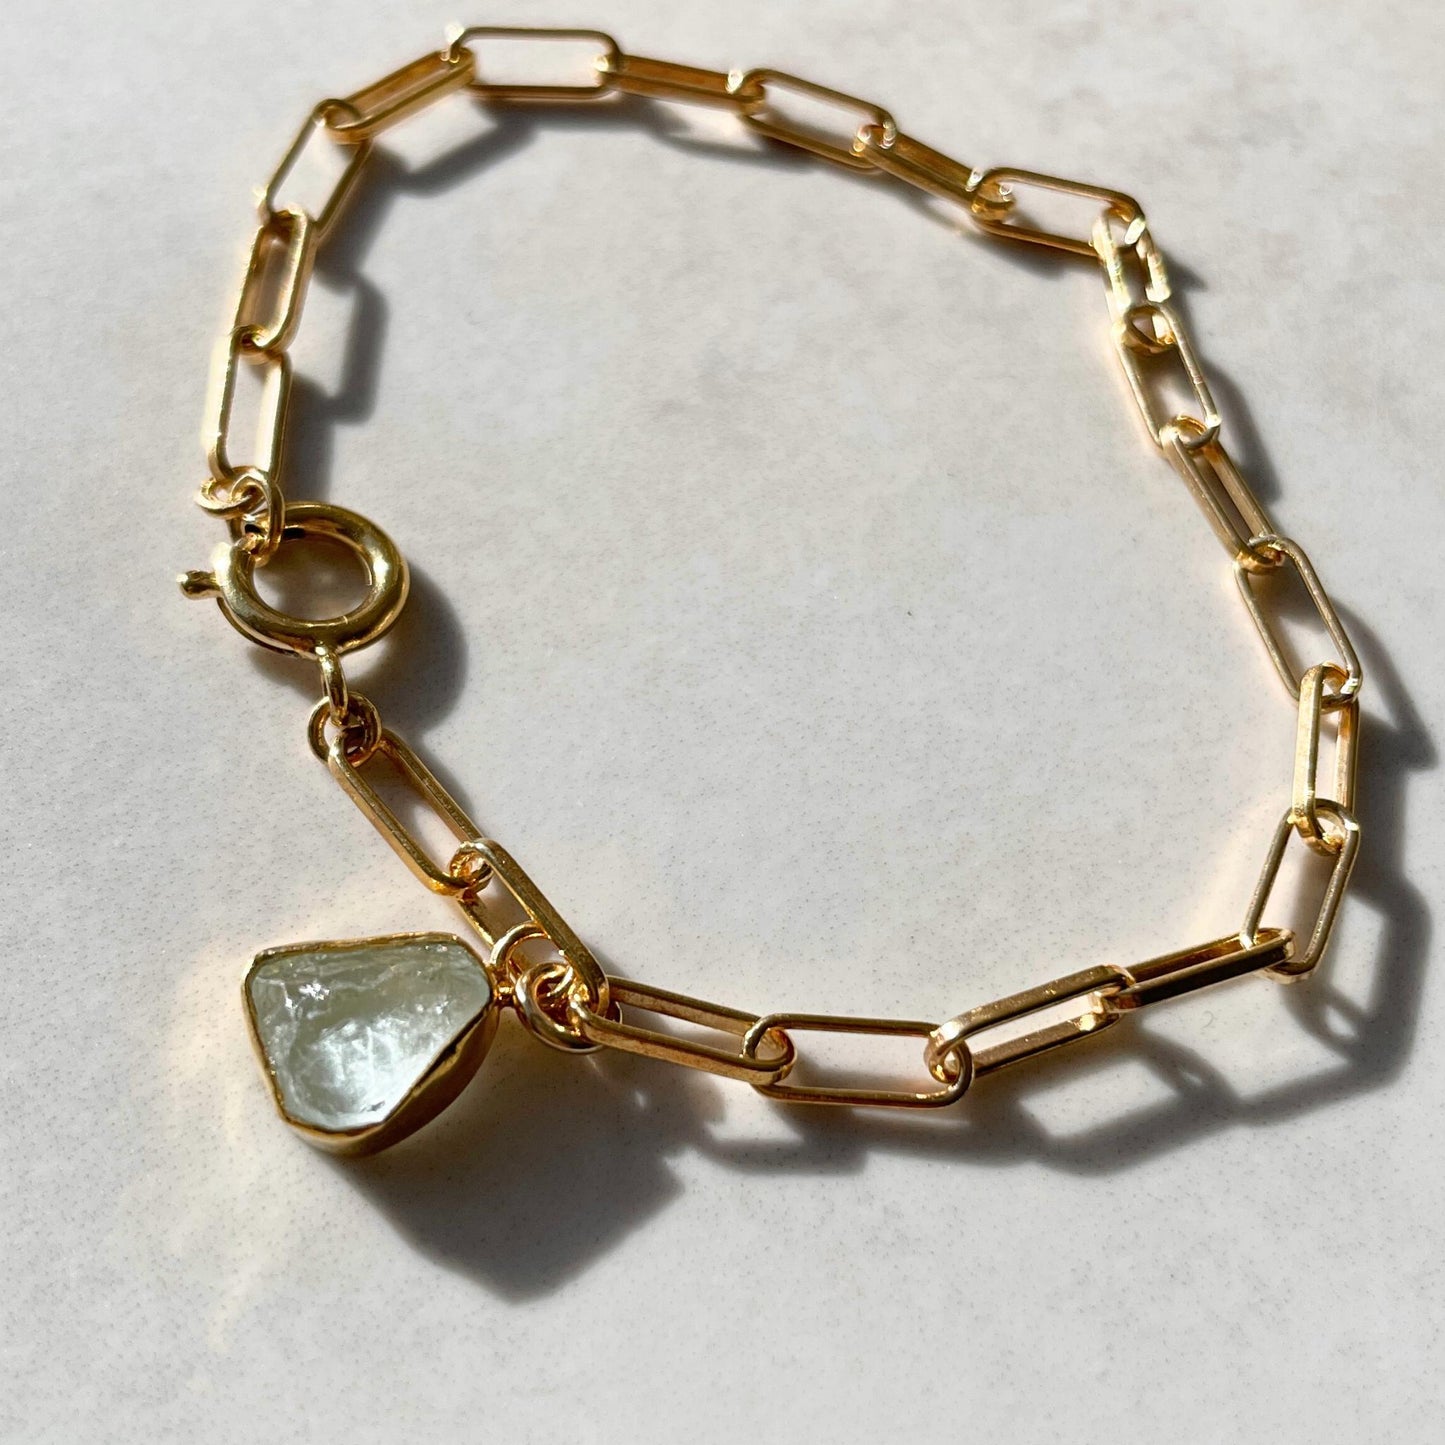 Aquamarine Carved Chunky Chain Bracelet | Serenity (Gold Plated)